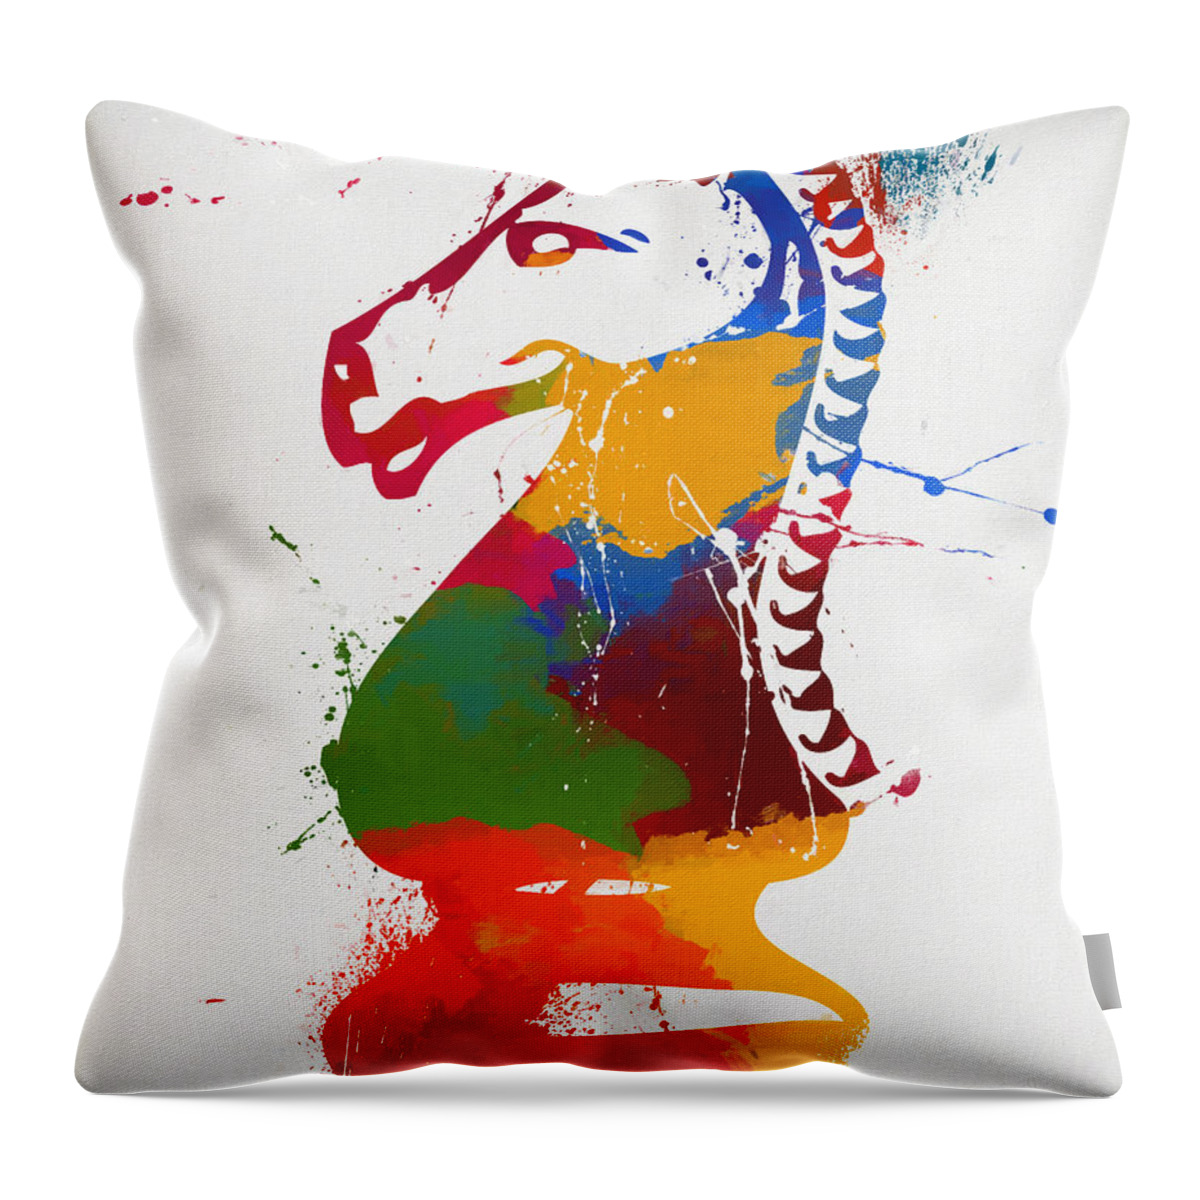 Knight Colorful Chess Piece Painting Throw Pillow featuring the painting Knight Colorful Chess Piece Painting by Dan Sproul